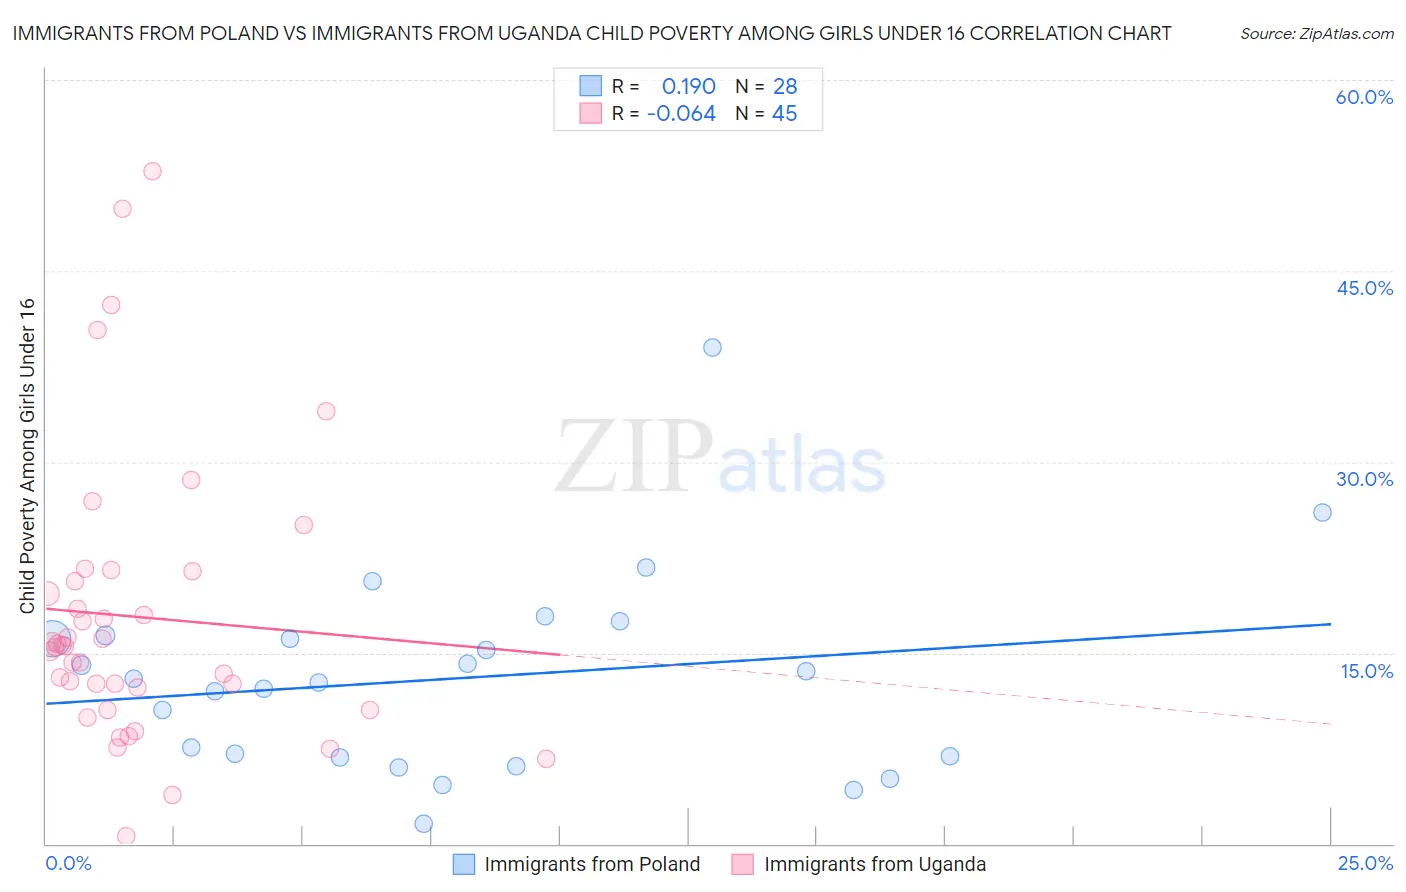 Immigrants from Poland vs Immigrants from Uganda Child Poverty Among Girls Under 16